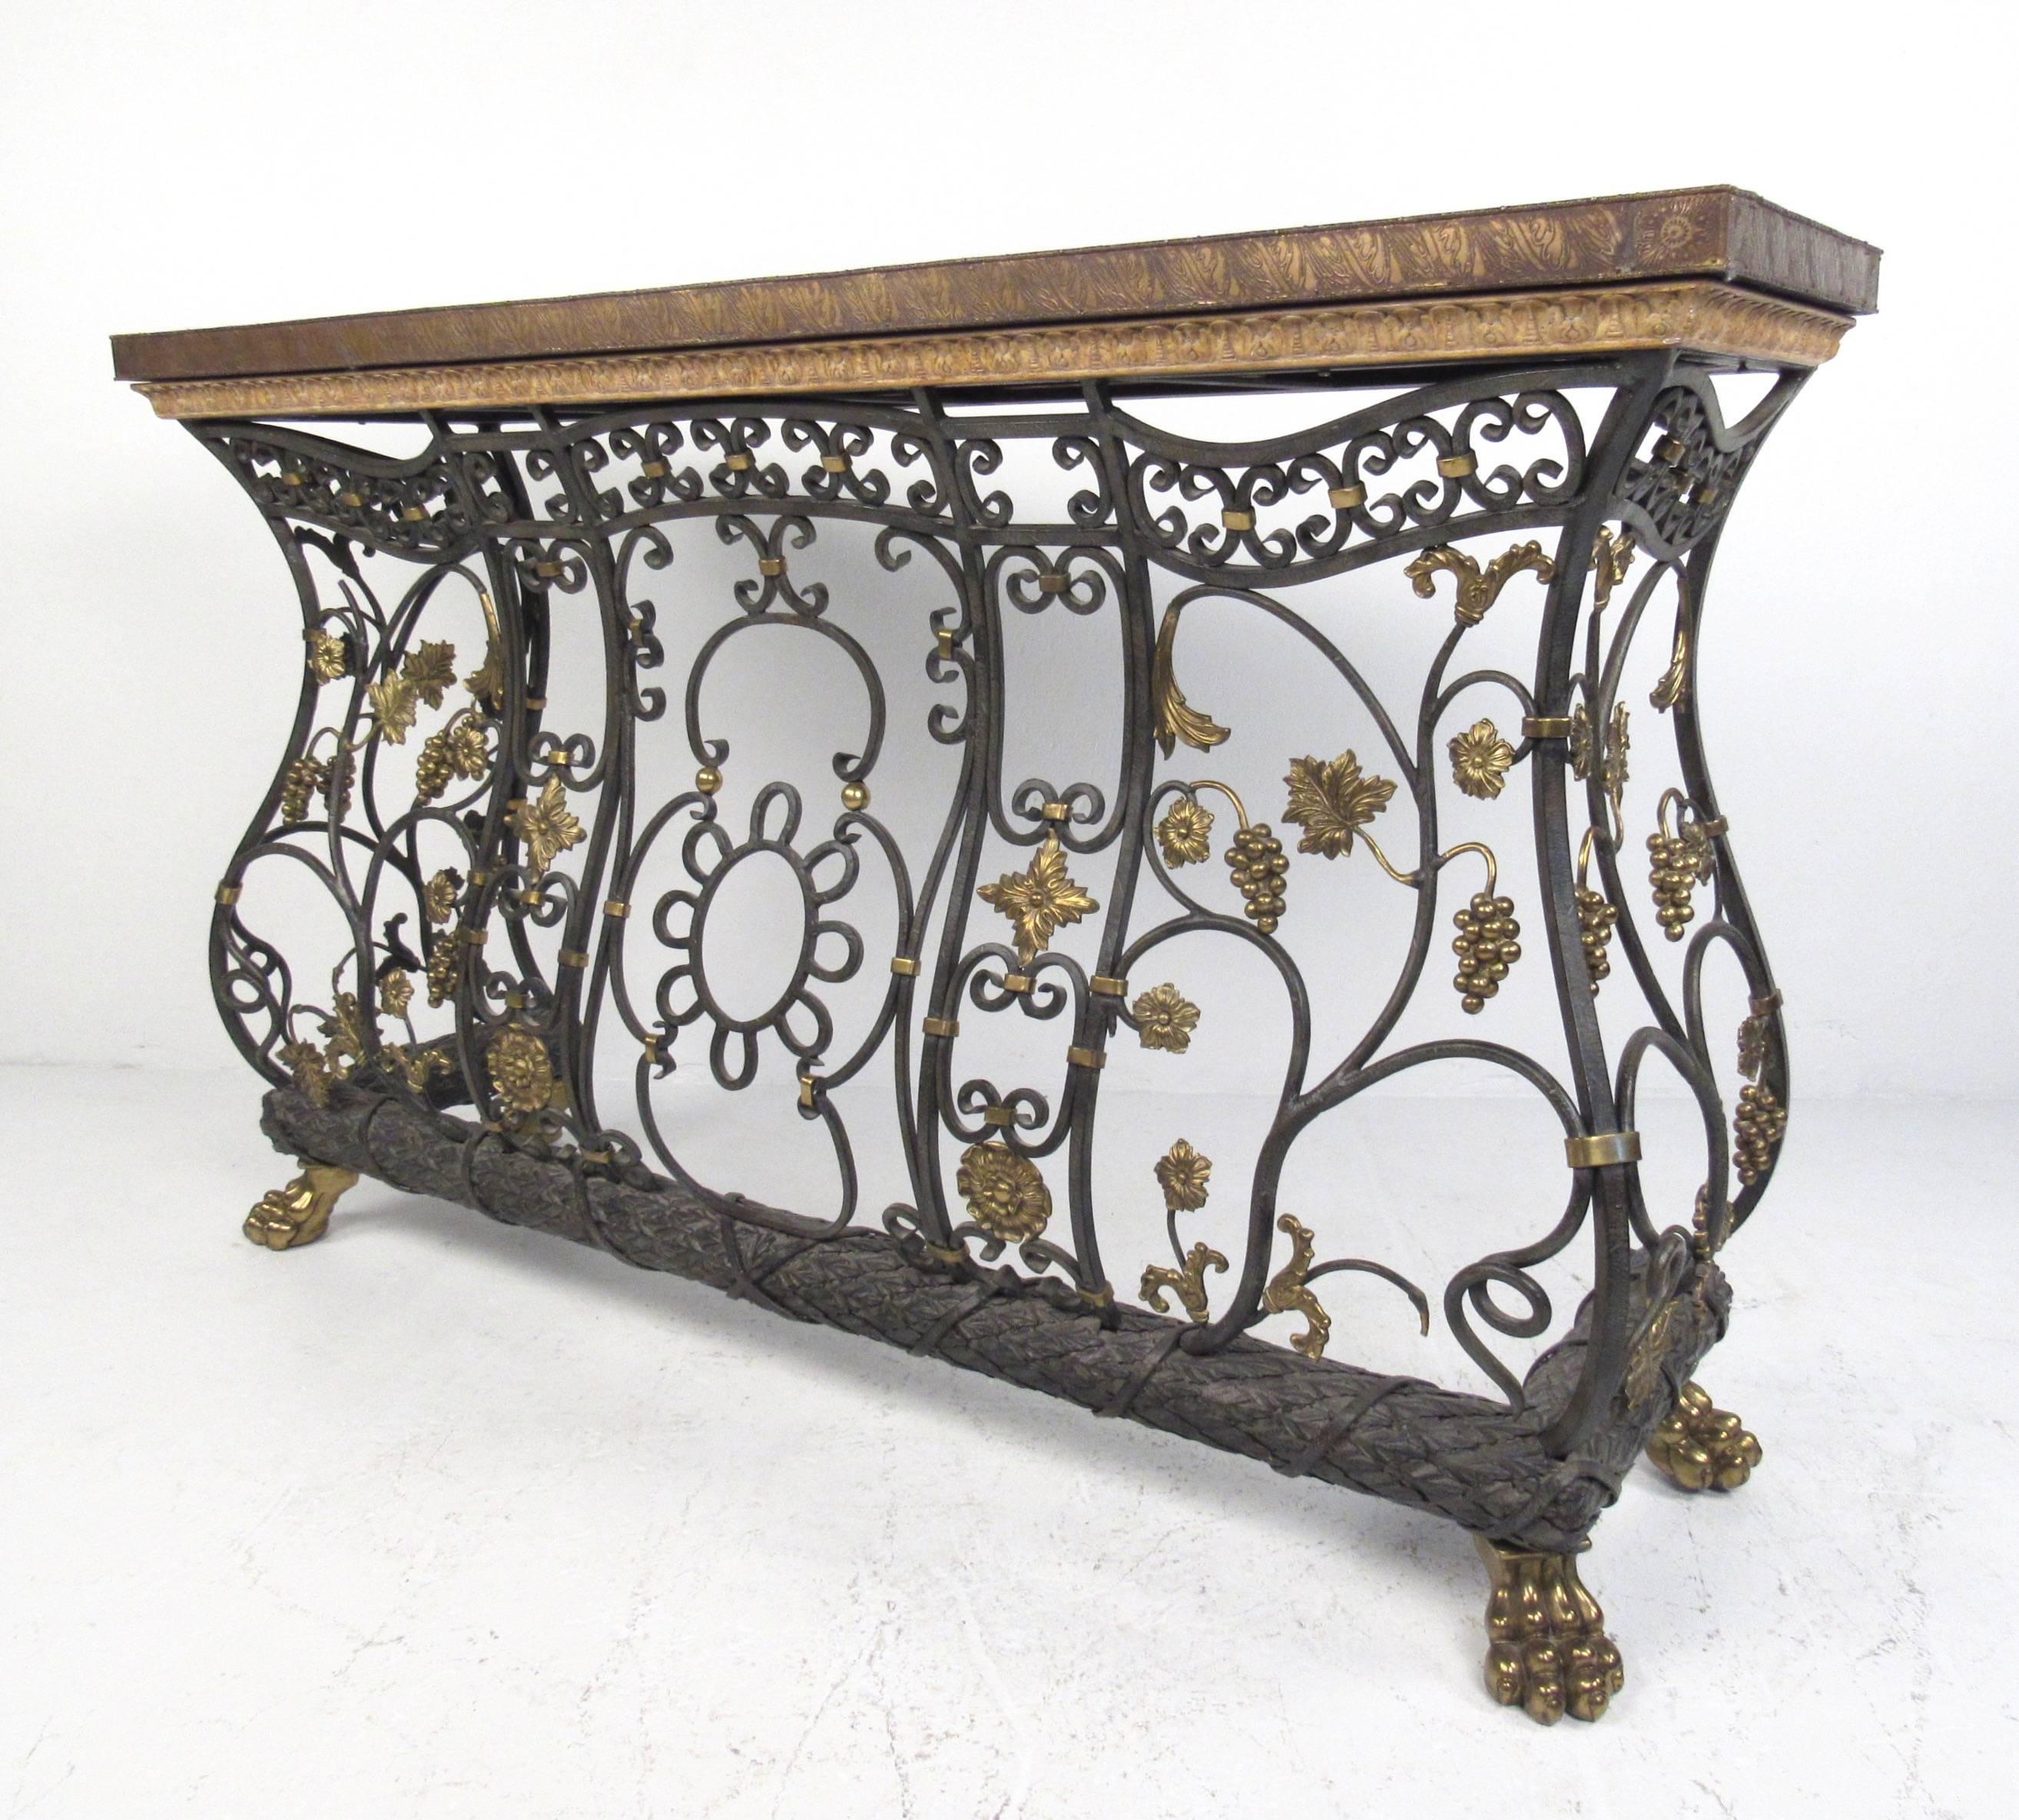 This elegant iron and bronze console table is designed for versatile use with a stylish mixed-metal composition and mosaic-tiled top. Heavy, high quality construction with masterful attention to detail, it exudes that old-world charm and stately